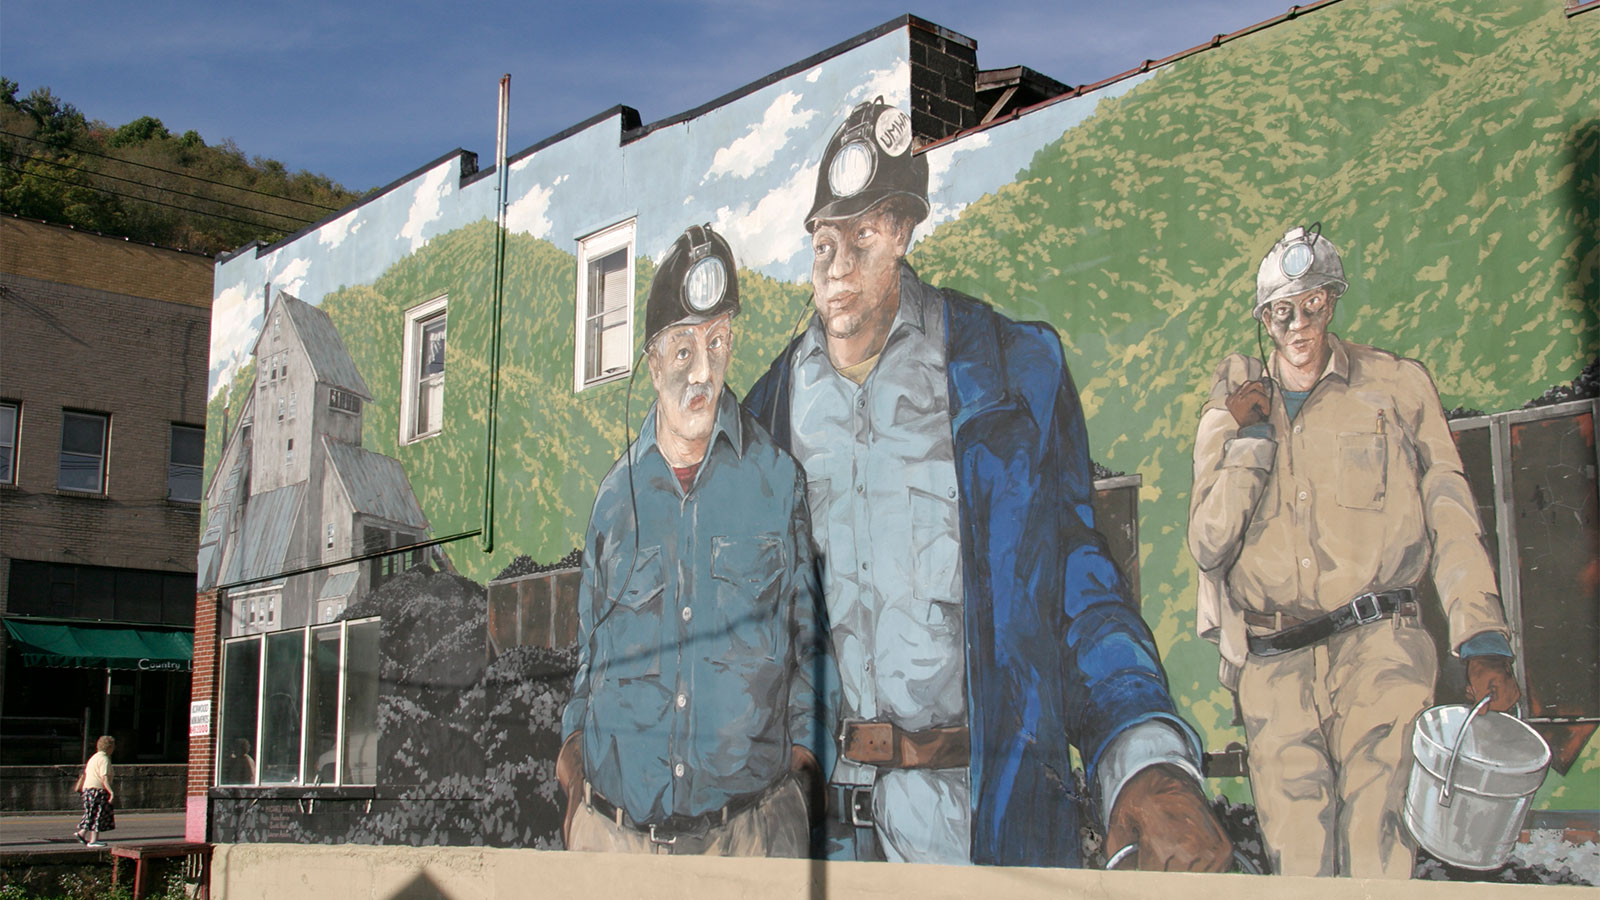 A coal miners wall mural on Main Street in Richwood